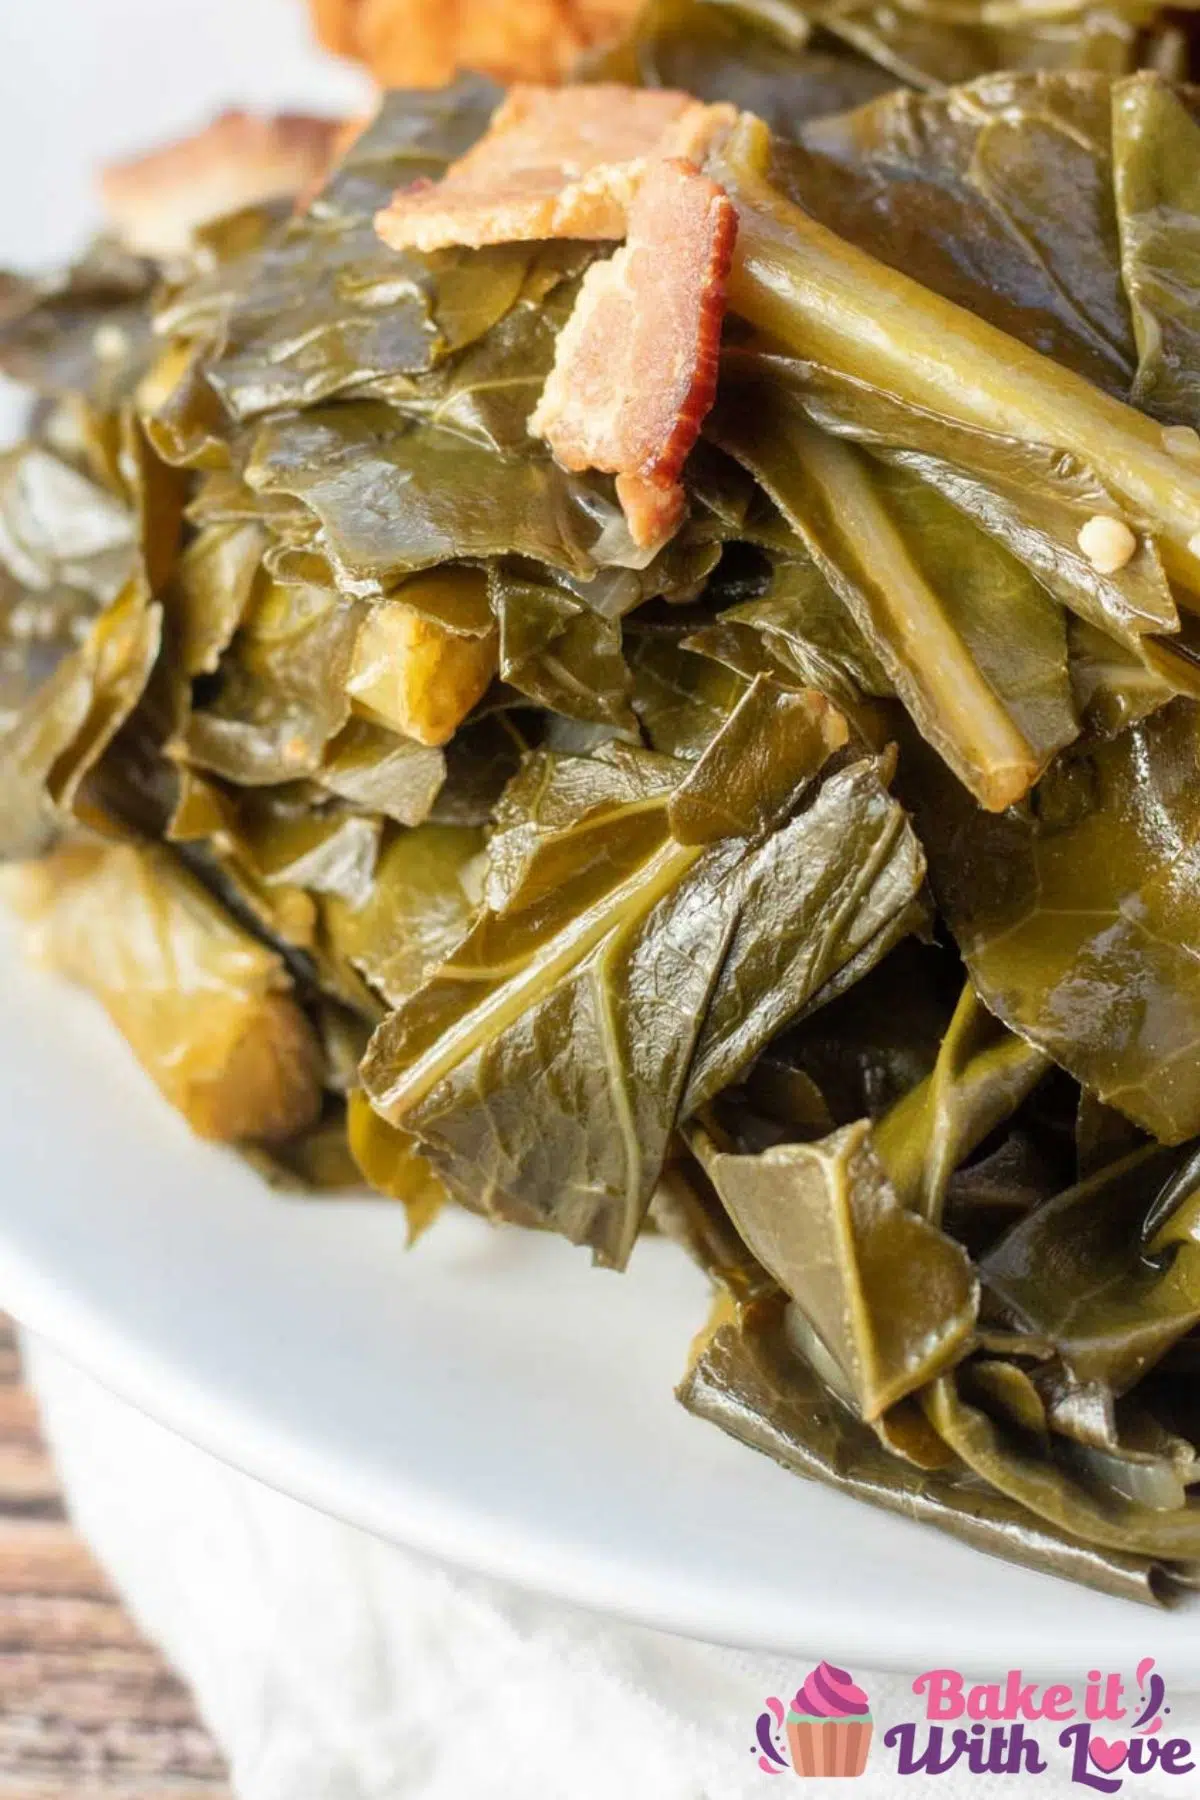 Tall closeup image of the cookied Instant Pot collard greens on white plate.